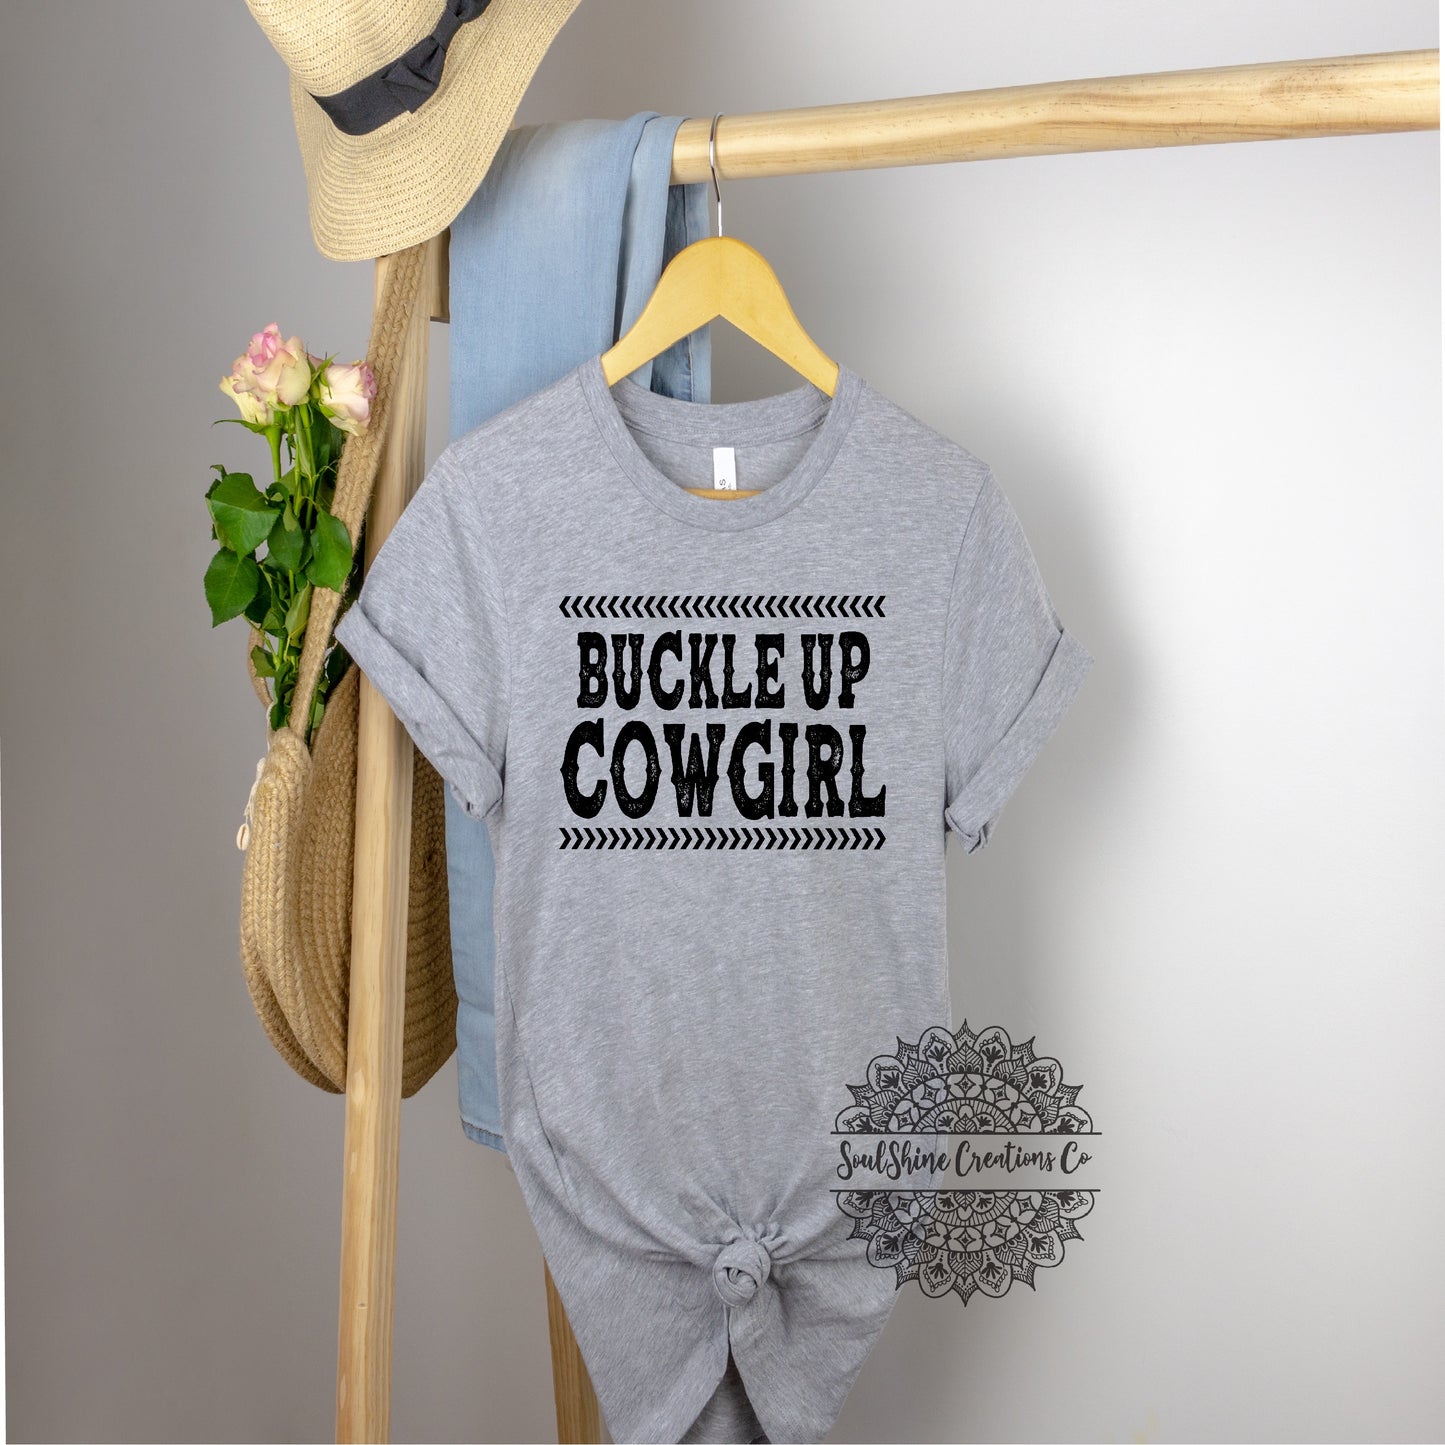 Buckle Up Cowgirl Shirt